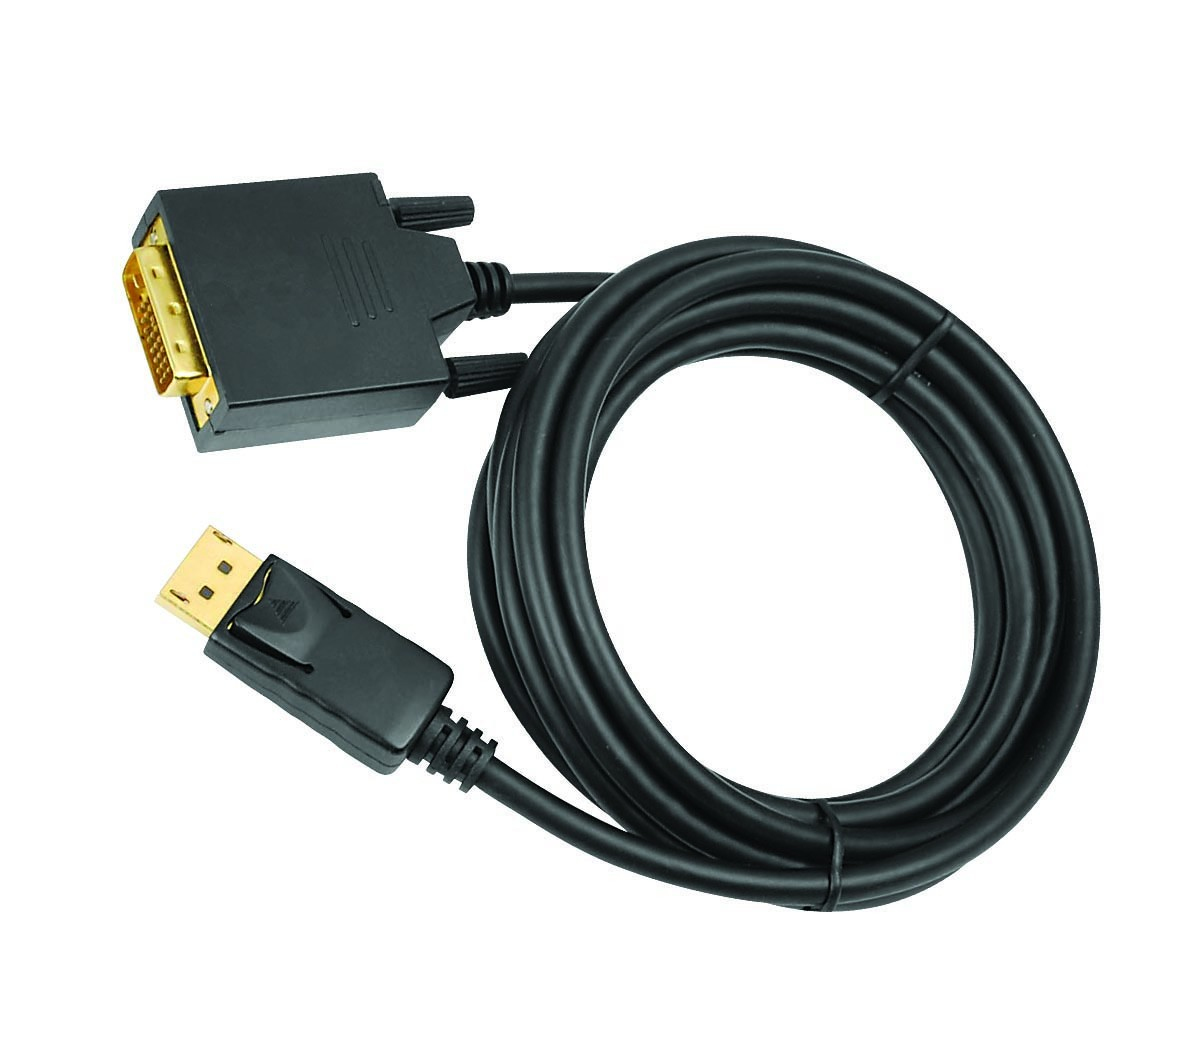 CB-DP1A11-S2 SIIG 10' DisplayPort to DVI Cable